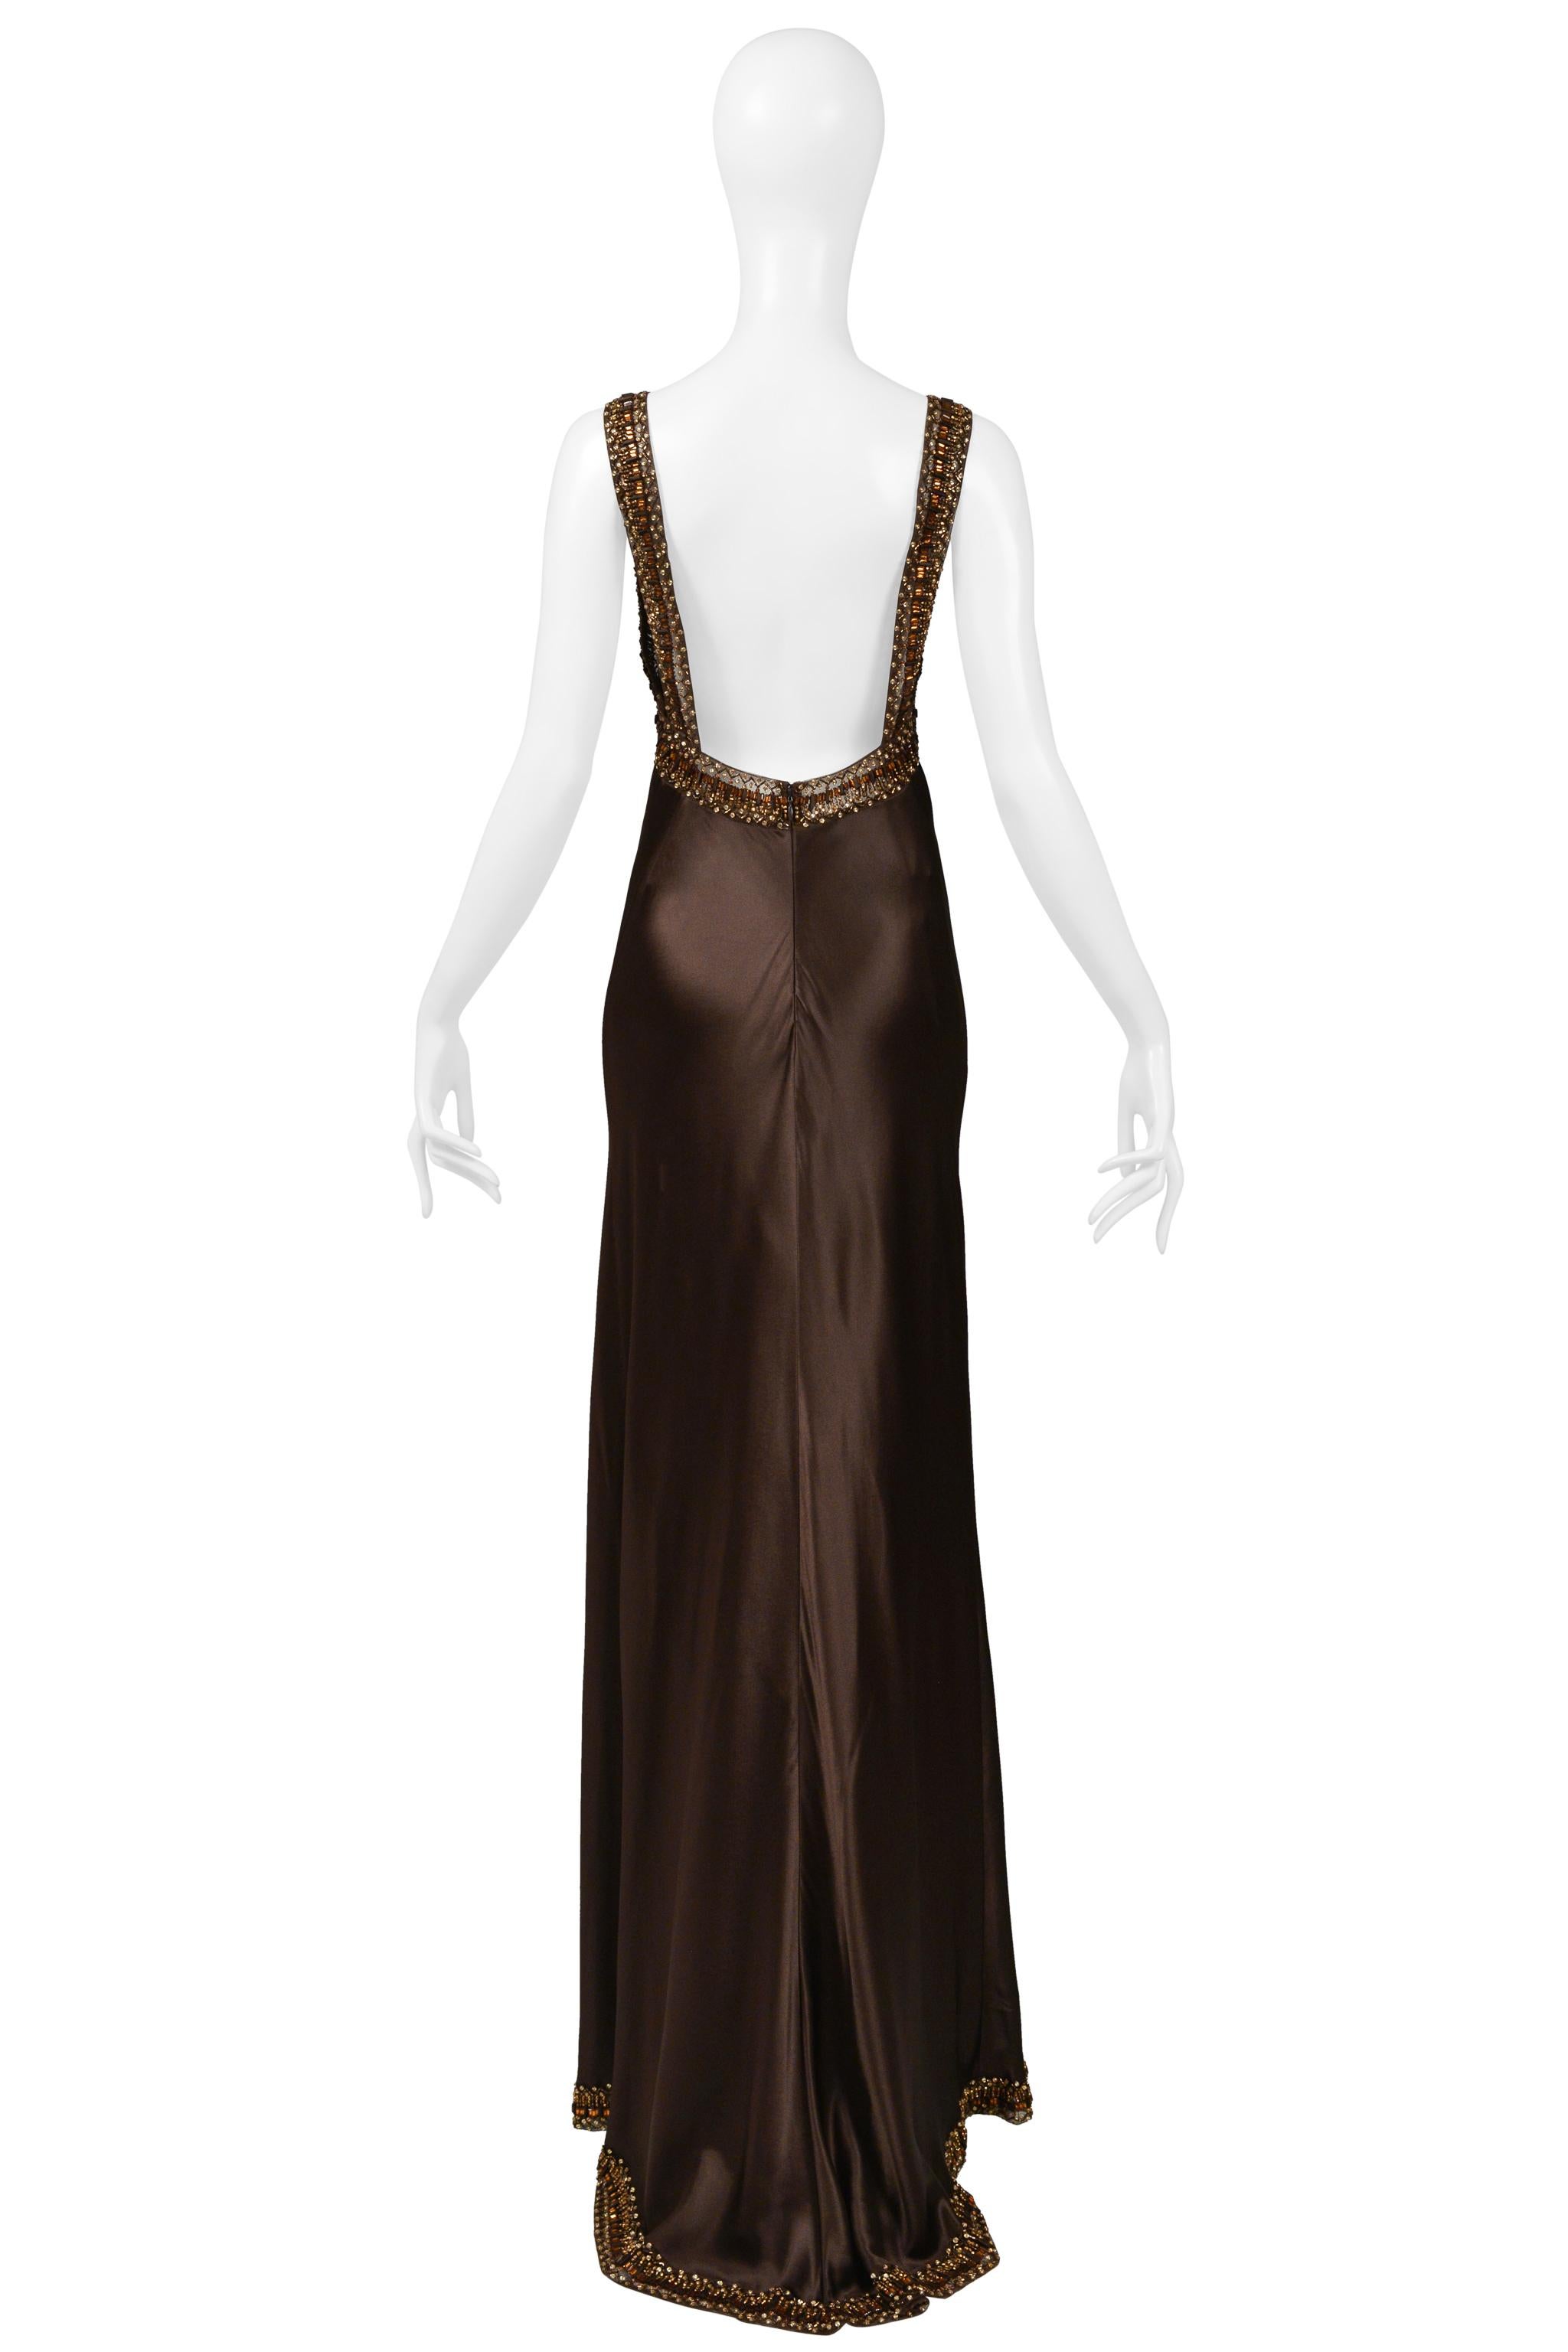 Valentino Brown Silk Evening Gown With Jacket AW 2006-07 For Sale 6